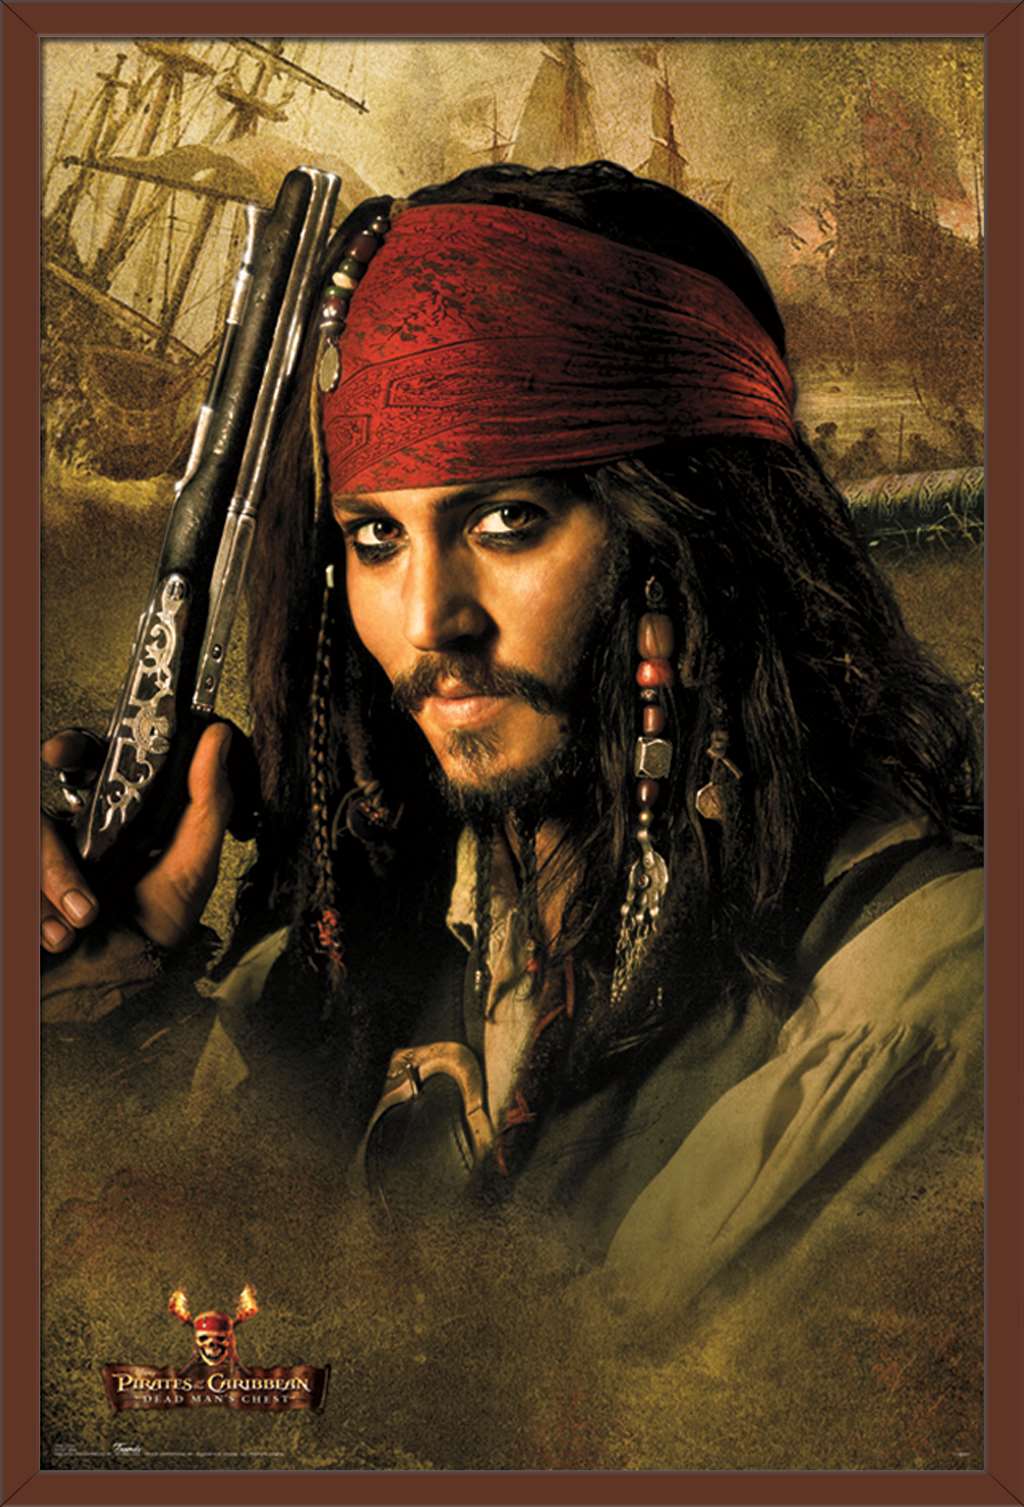 Disney Pirates of the Caribbean: Dead Man's Chest - Johnny Depp Wall Poster, 22.375" x 34", Framed - image 1 of 2